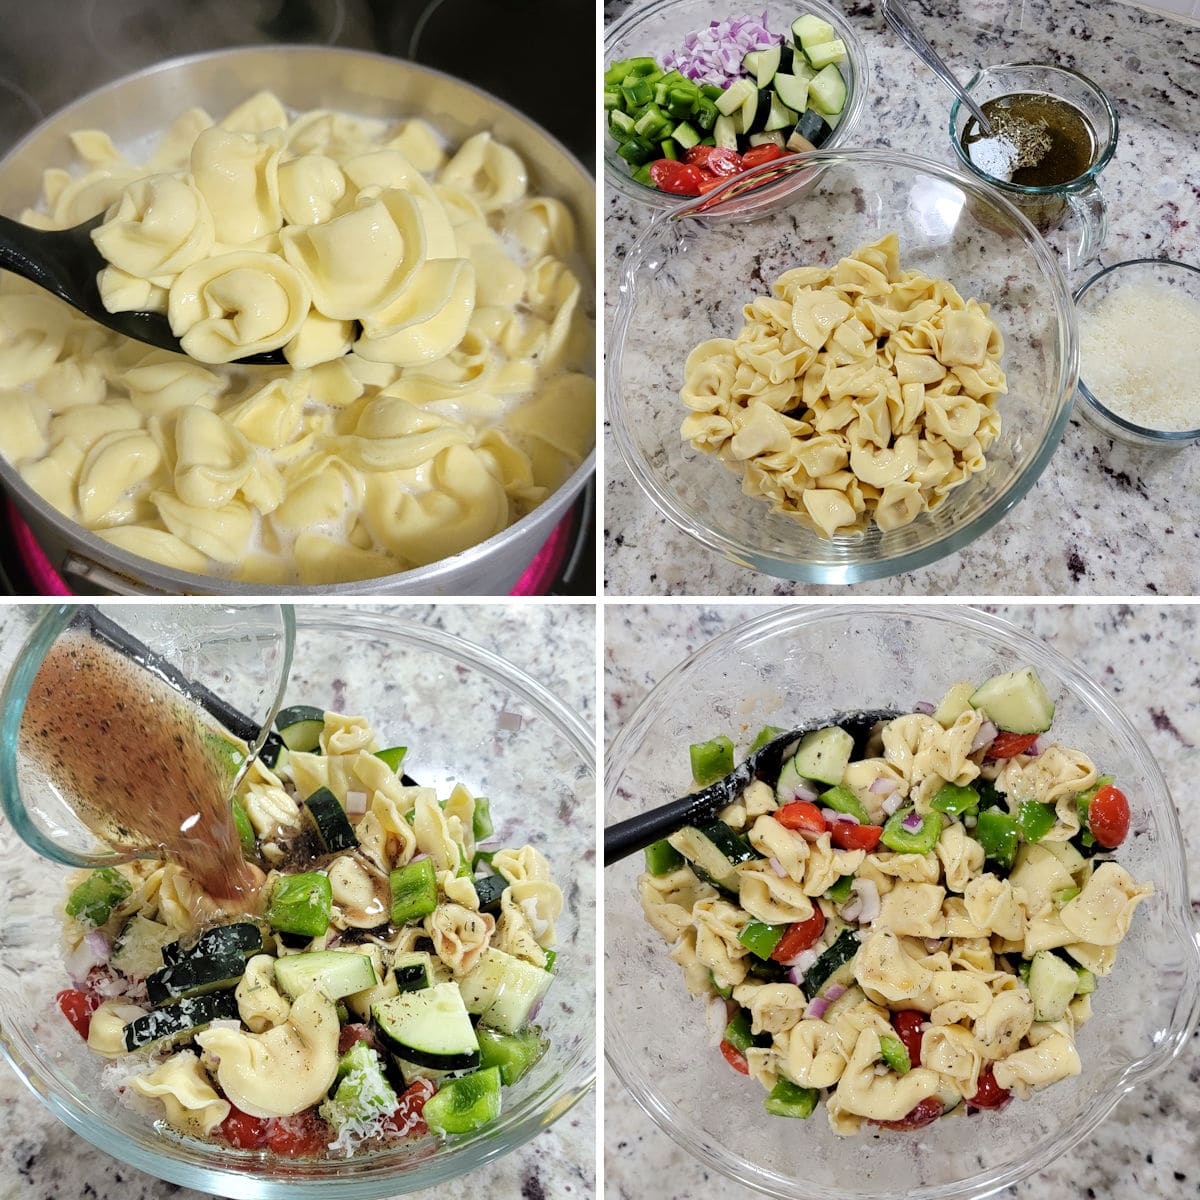 Collage showing the steps making a tortellini pasta salad.